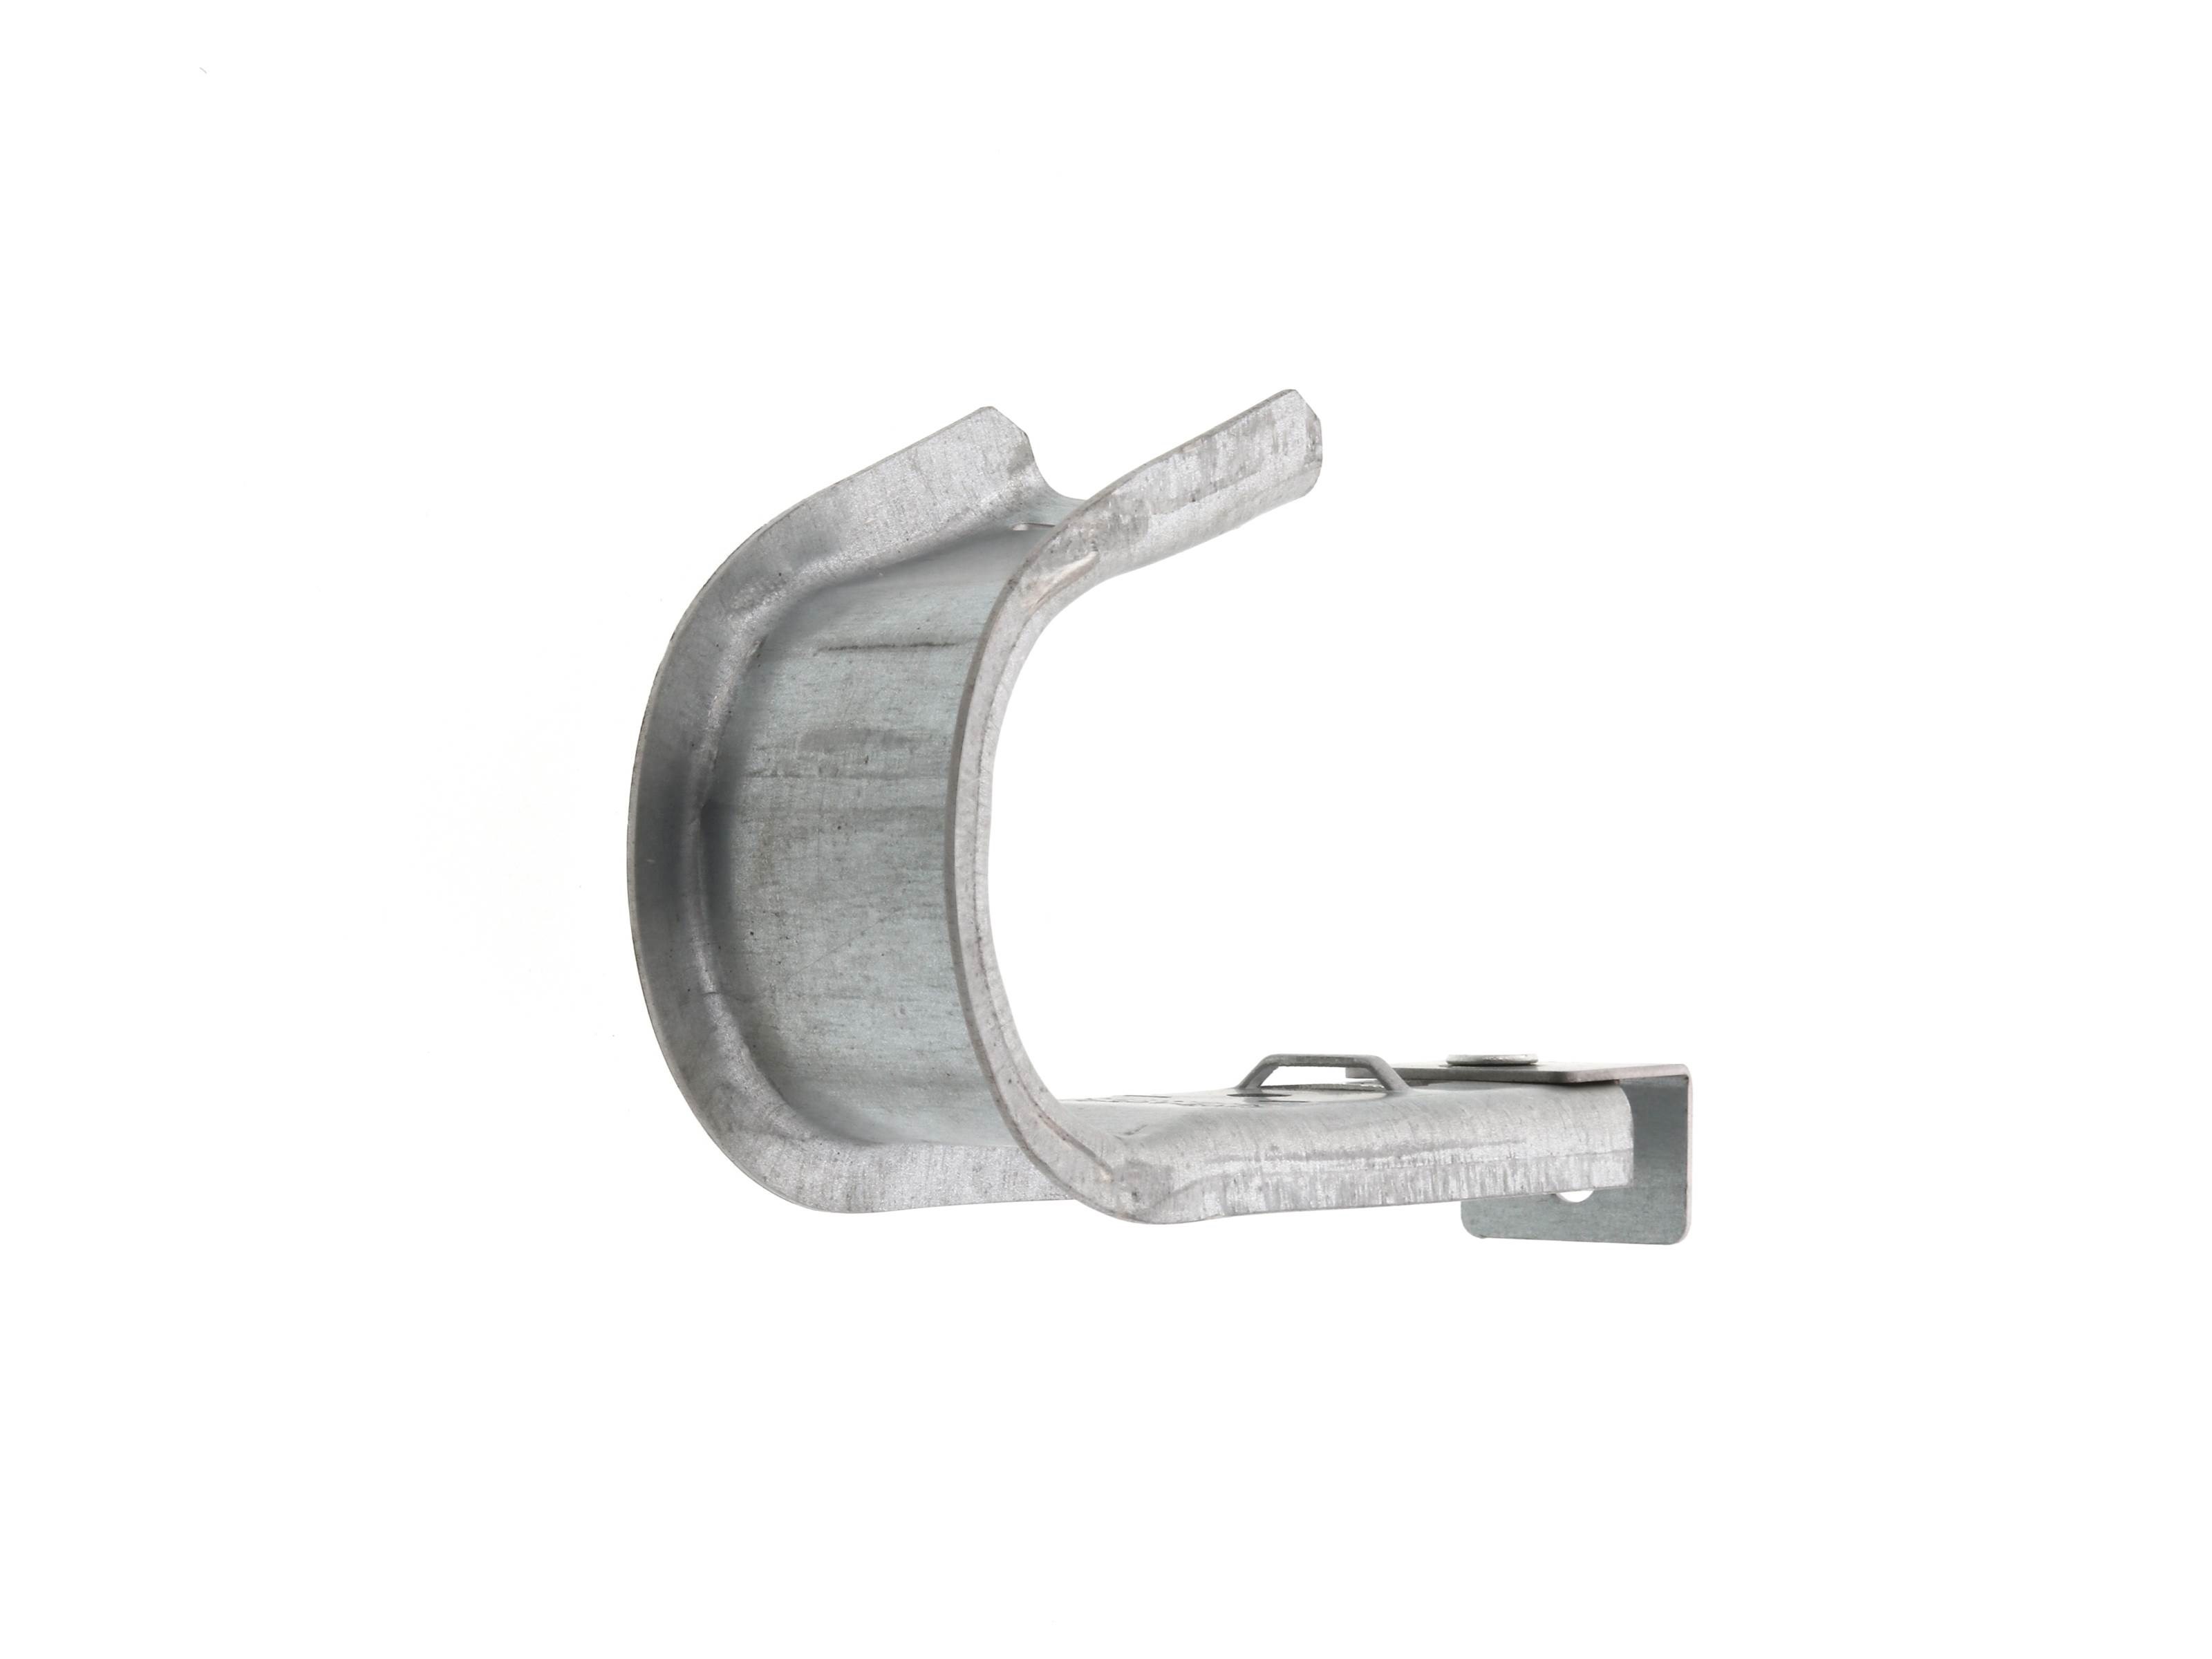 2 Inch J-Hook - Ceiling Mount, Galvanized, 25 Pack at Cables N More